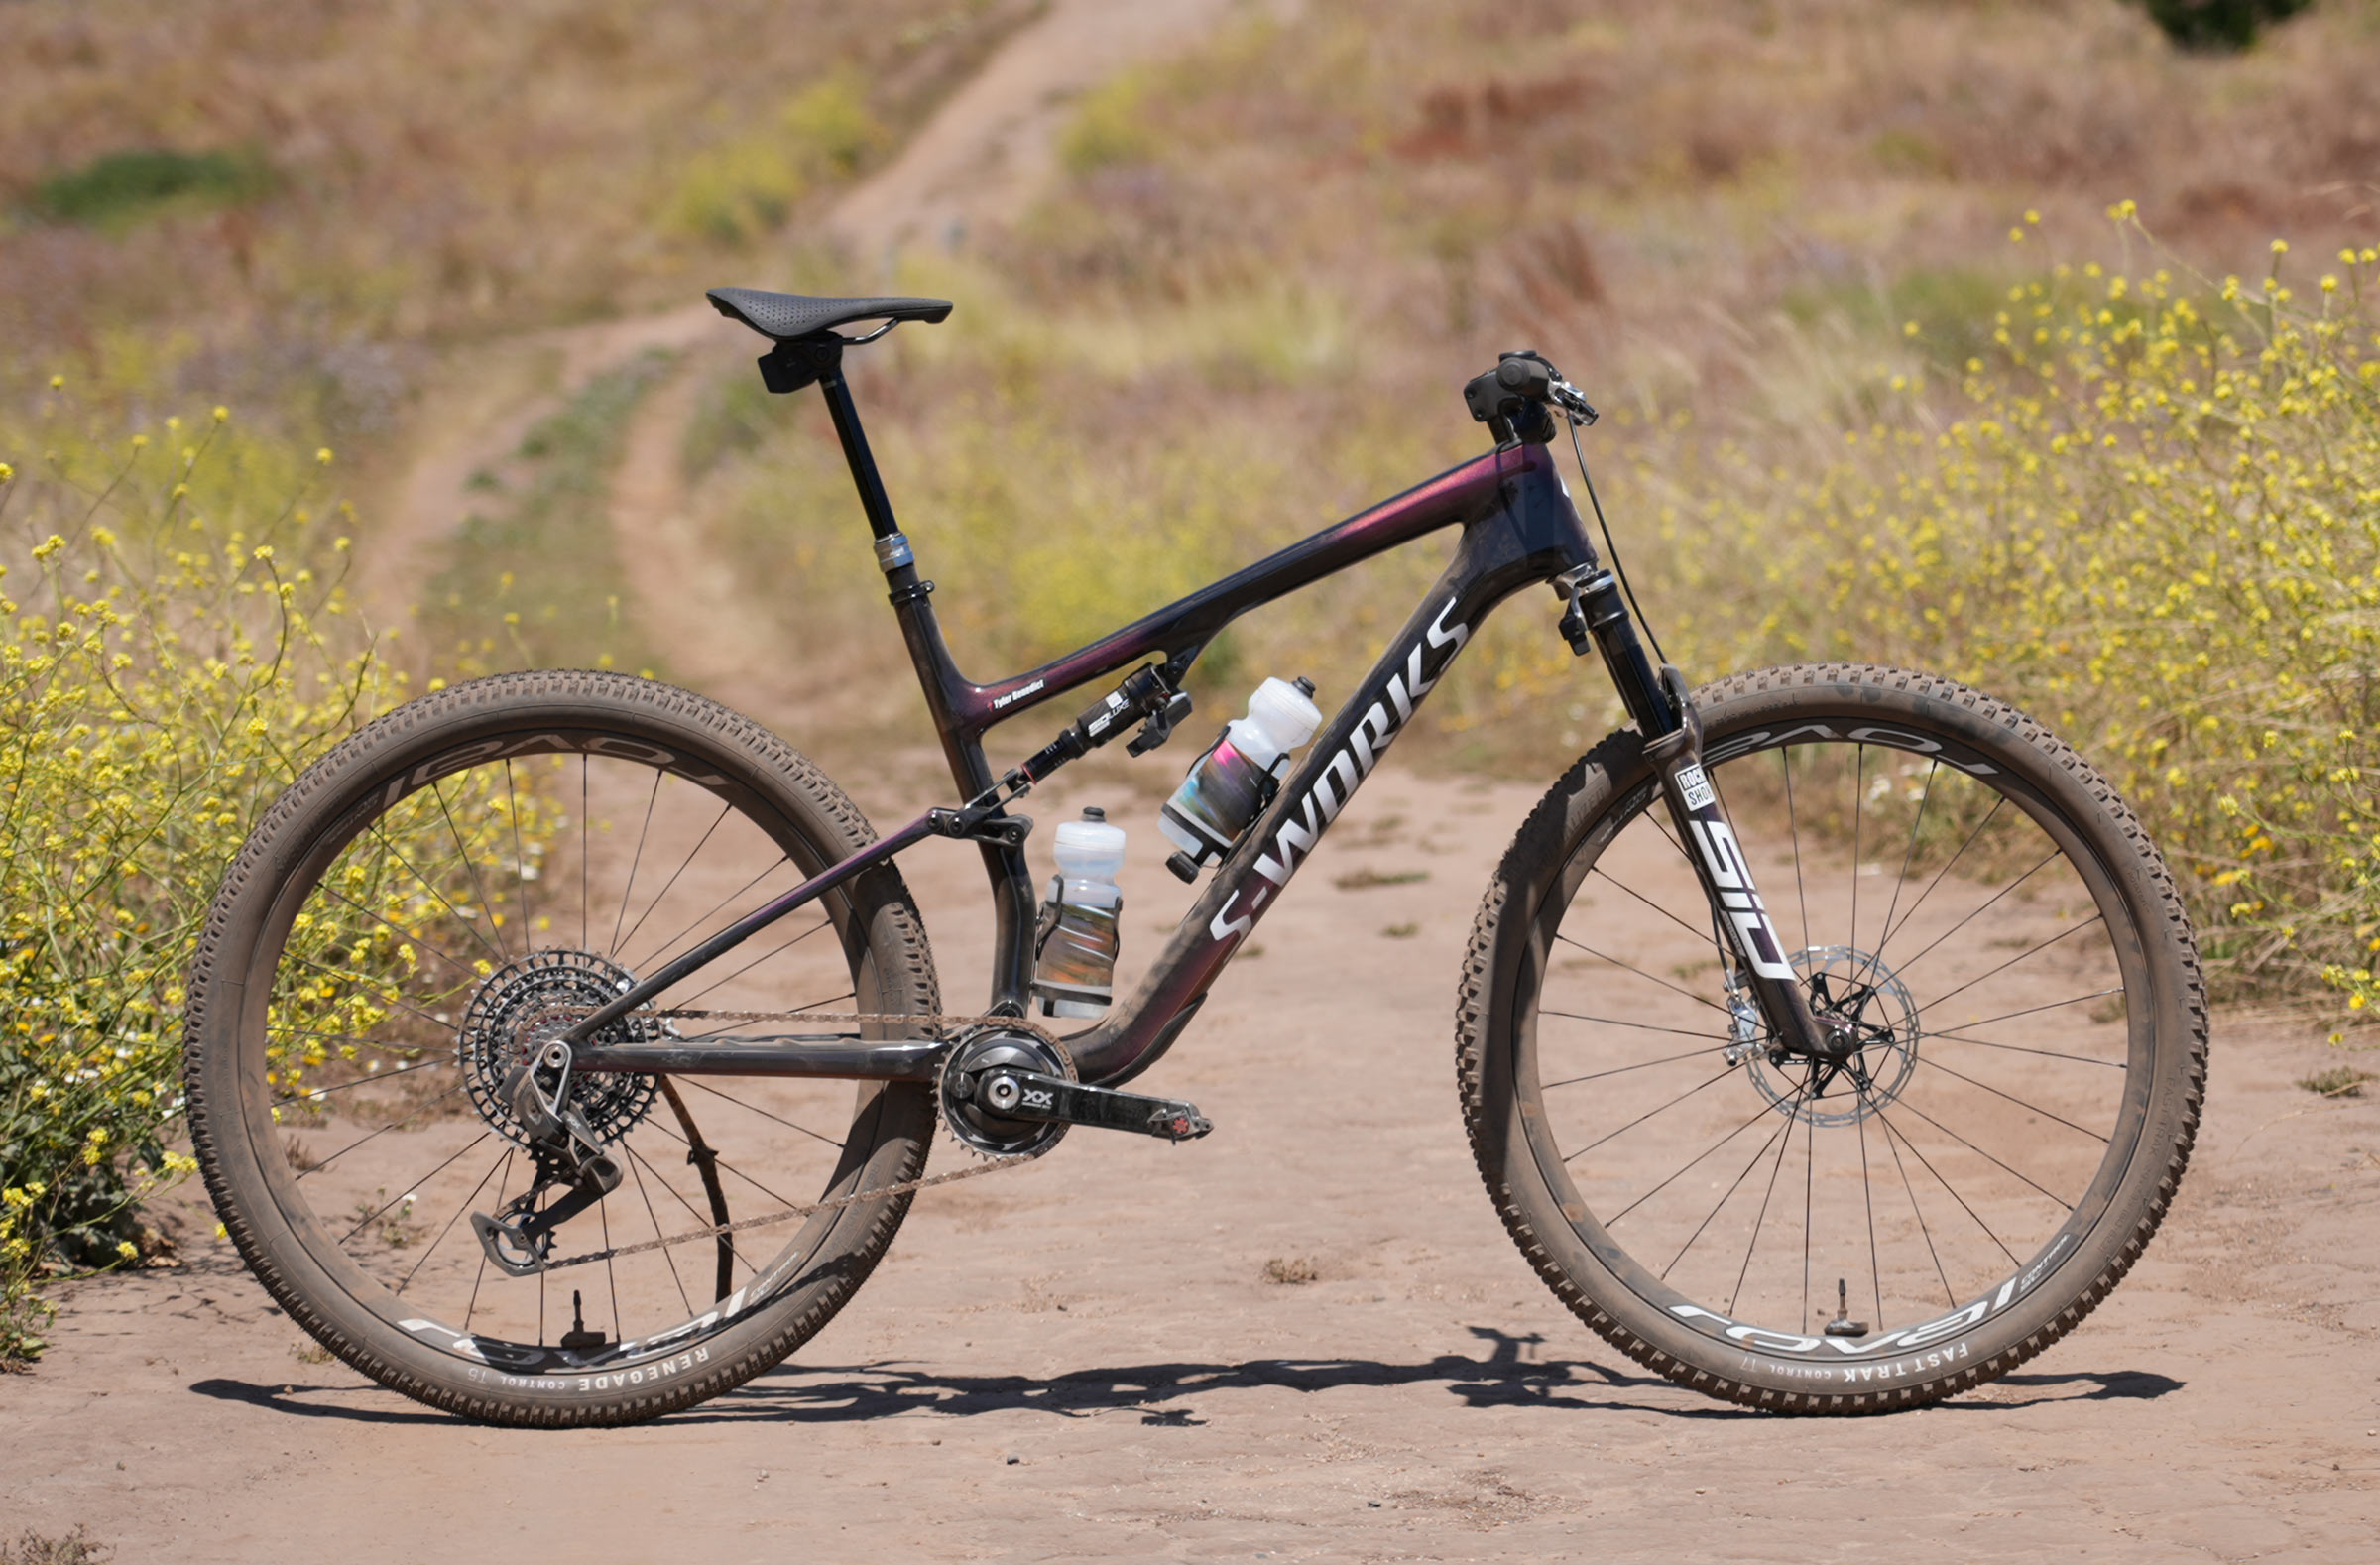 First Look! All-new Specialized Epic 8 S-Works & EVO XC bikes